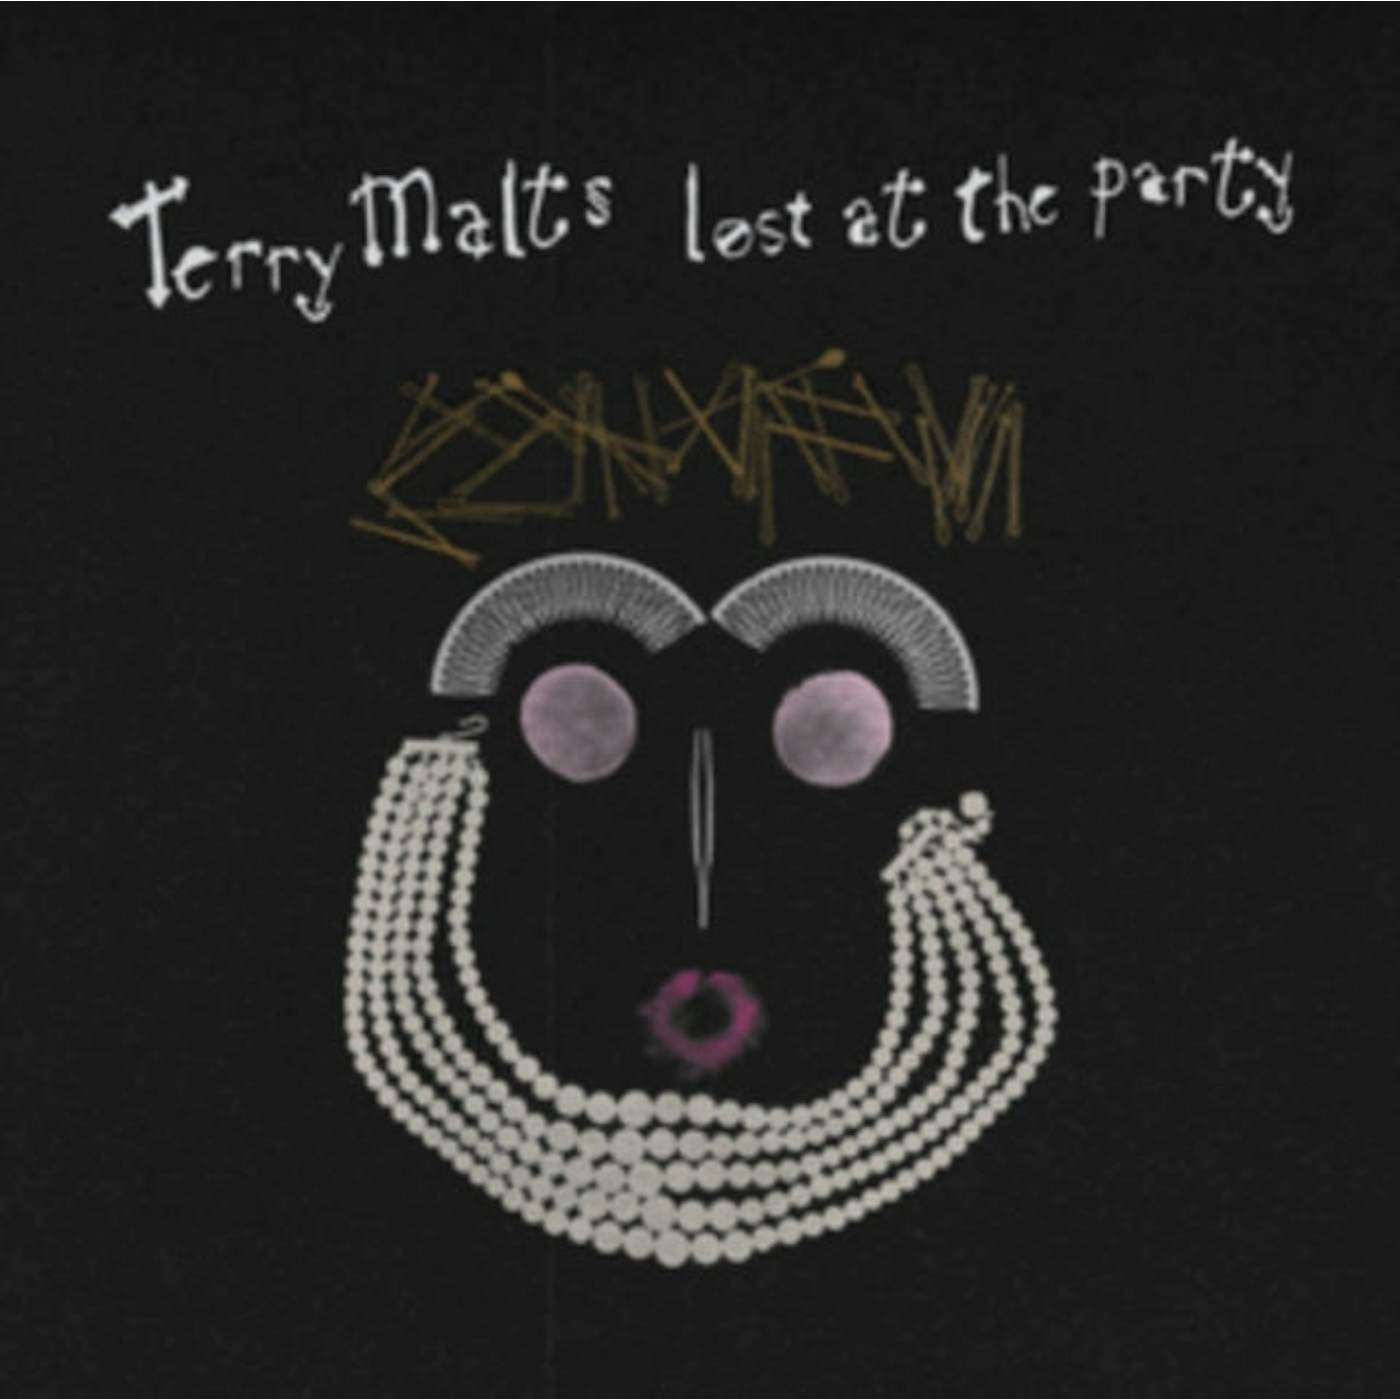 Terry Malts LP - Lost At The Party (Vinyl)